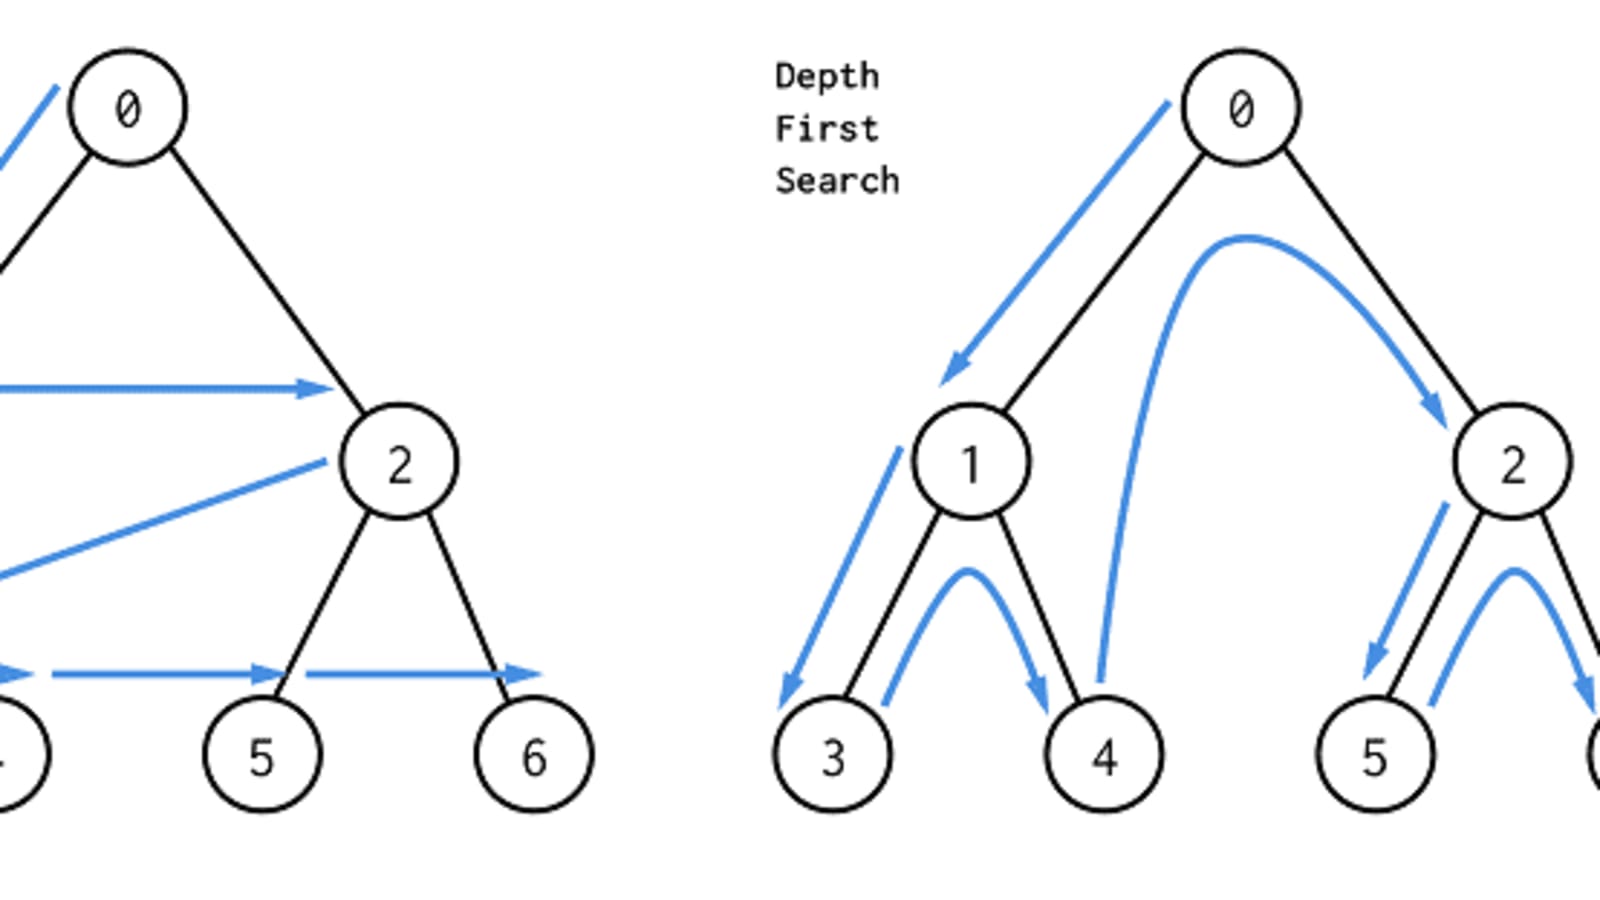 Difference between Depth First Search and Breadth First Search